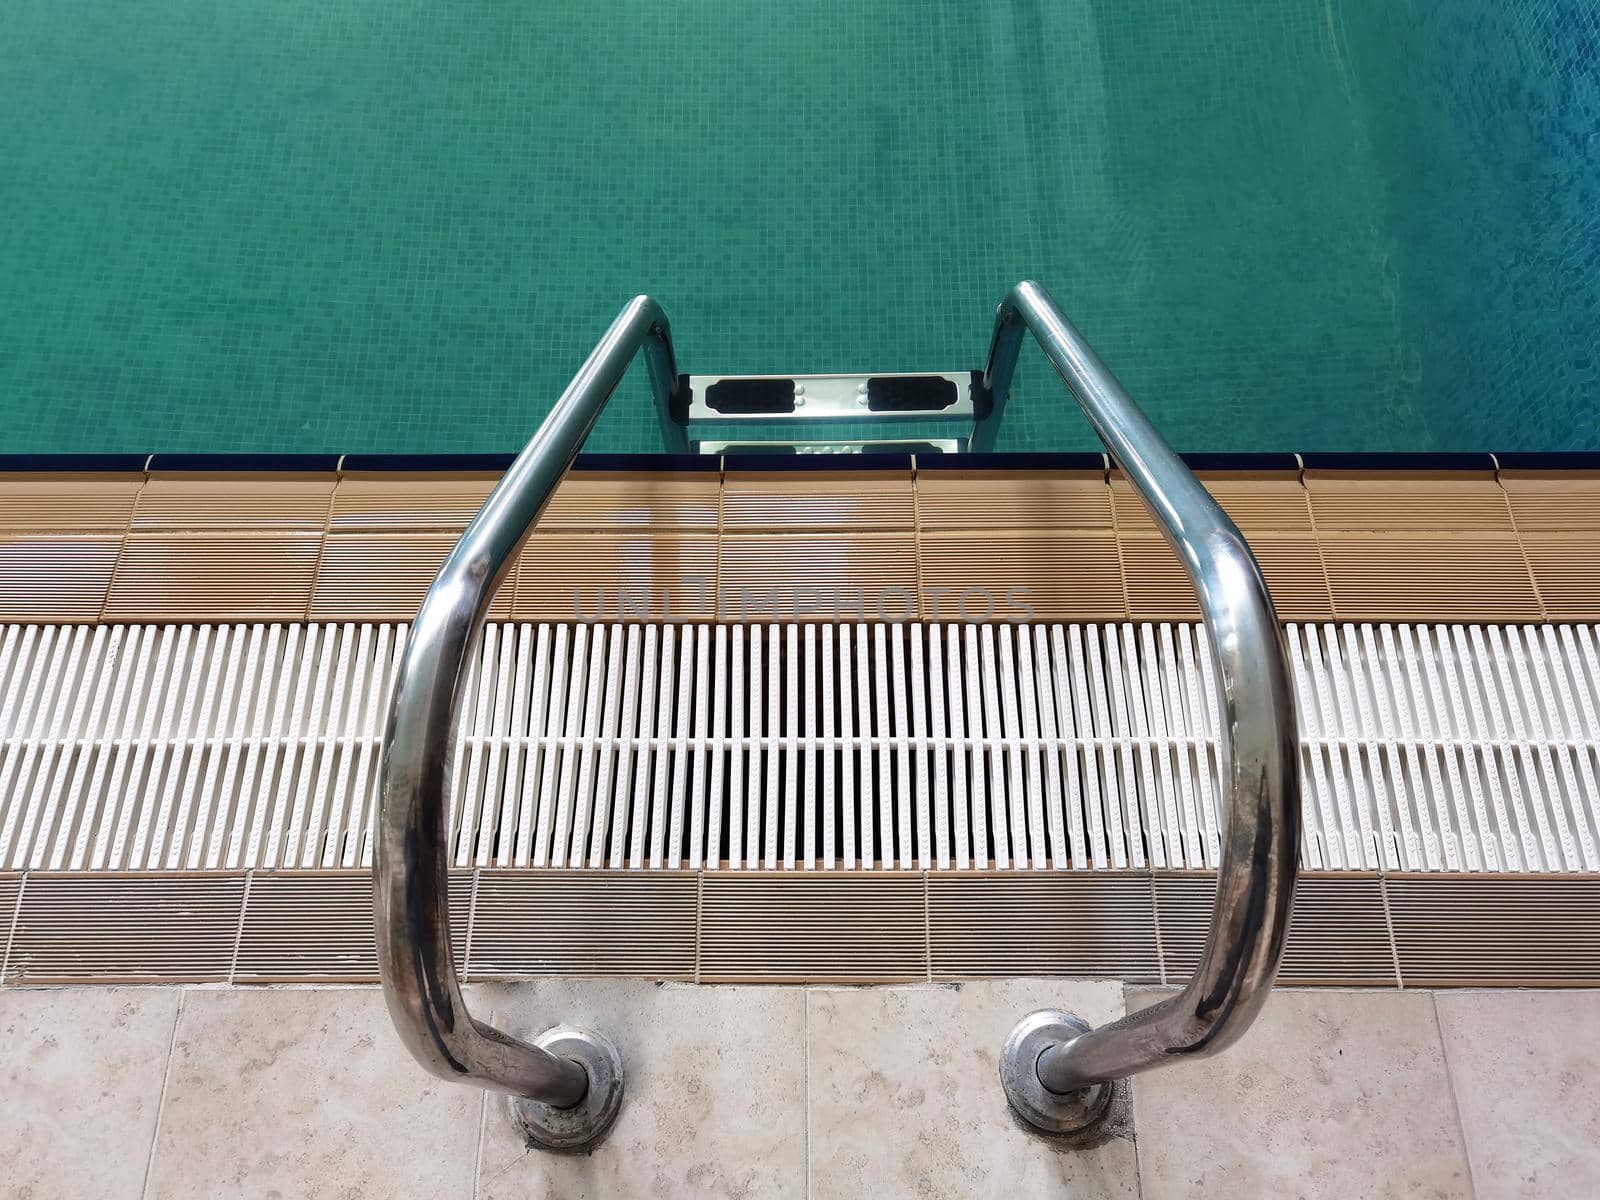 Handrail on pool. Swimming pool with stair at tropical resort. Top view by EdVal